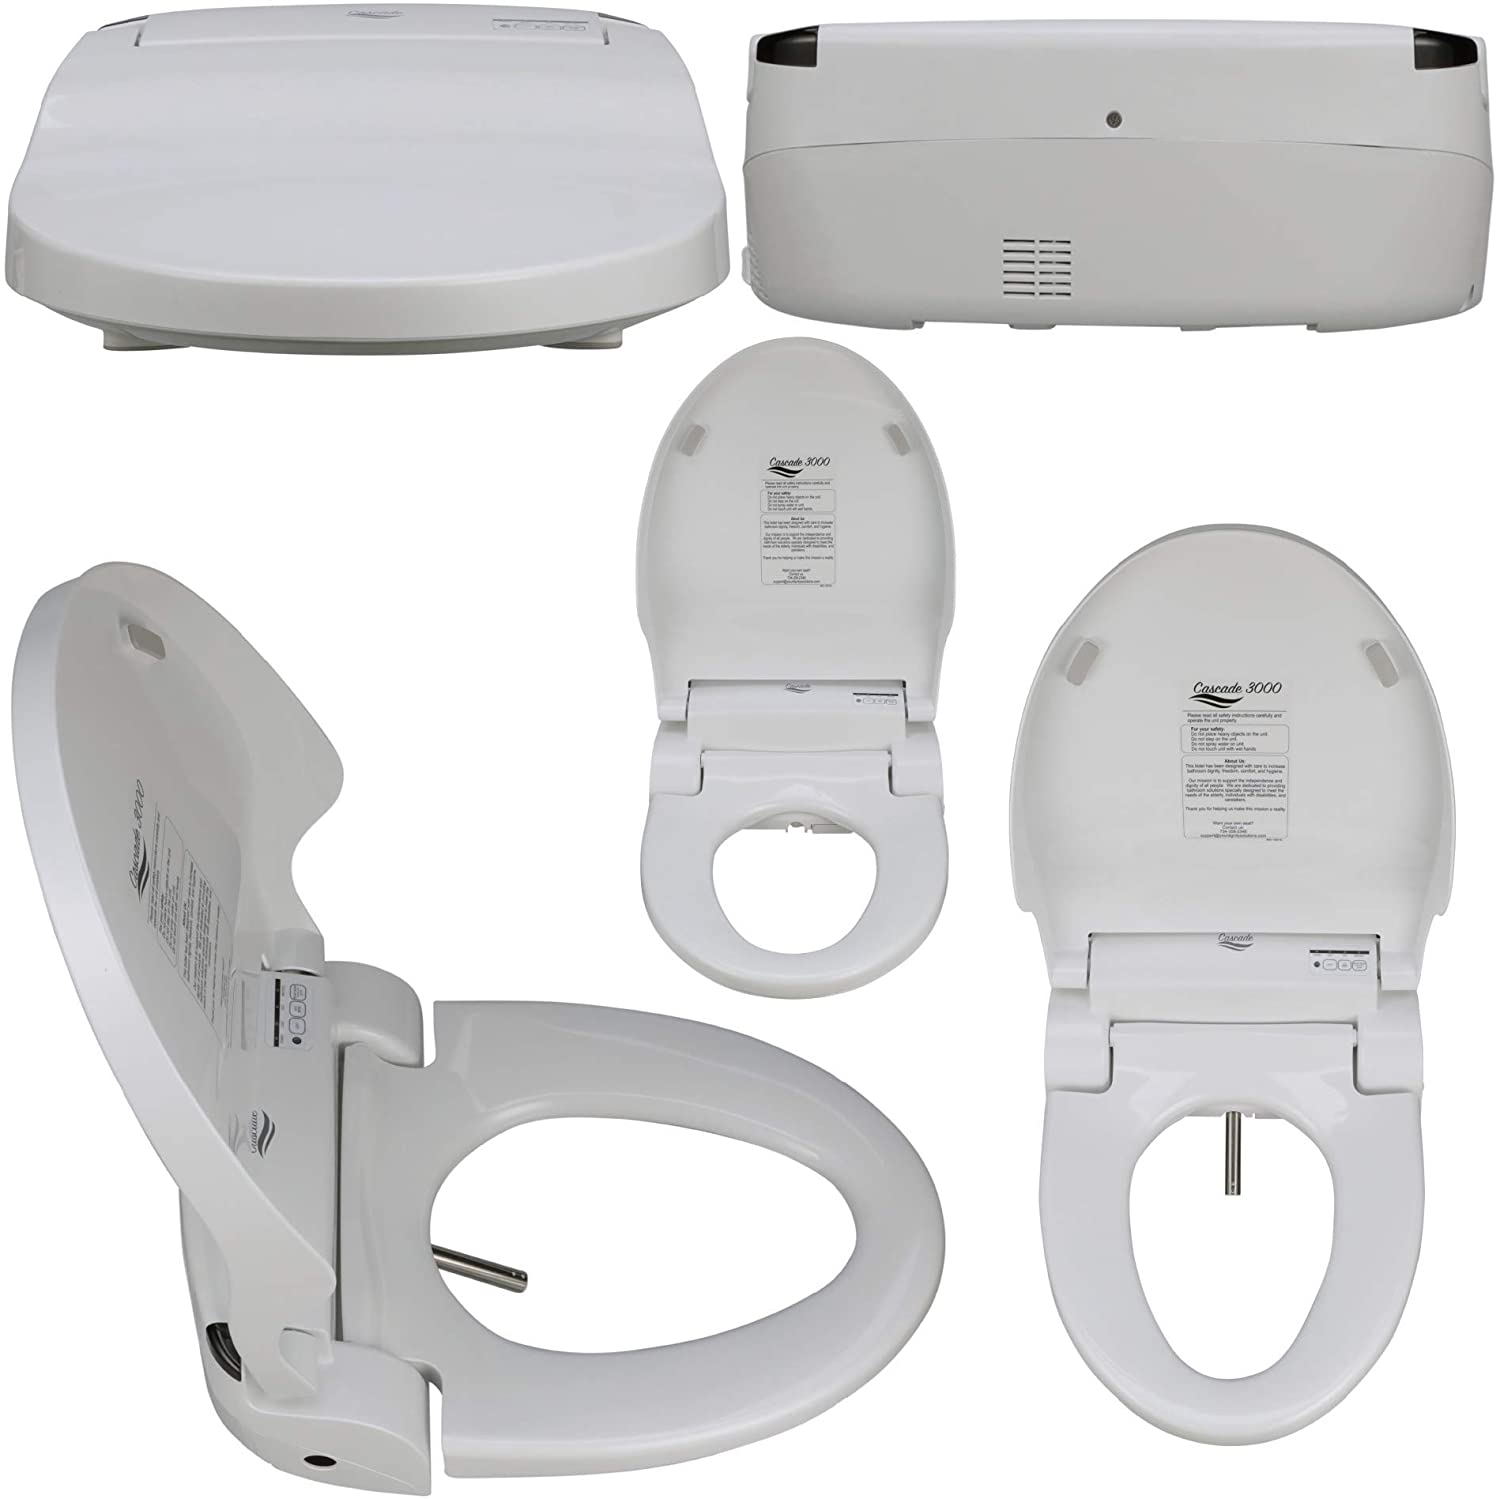 Cascade 3000 Bidet Seat Equipped With Instant H2O Heater ADA Compliant